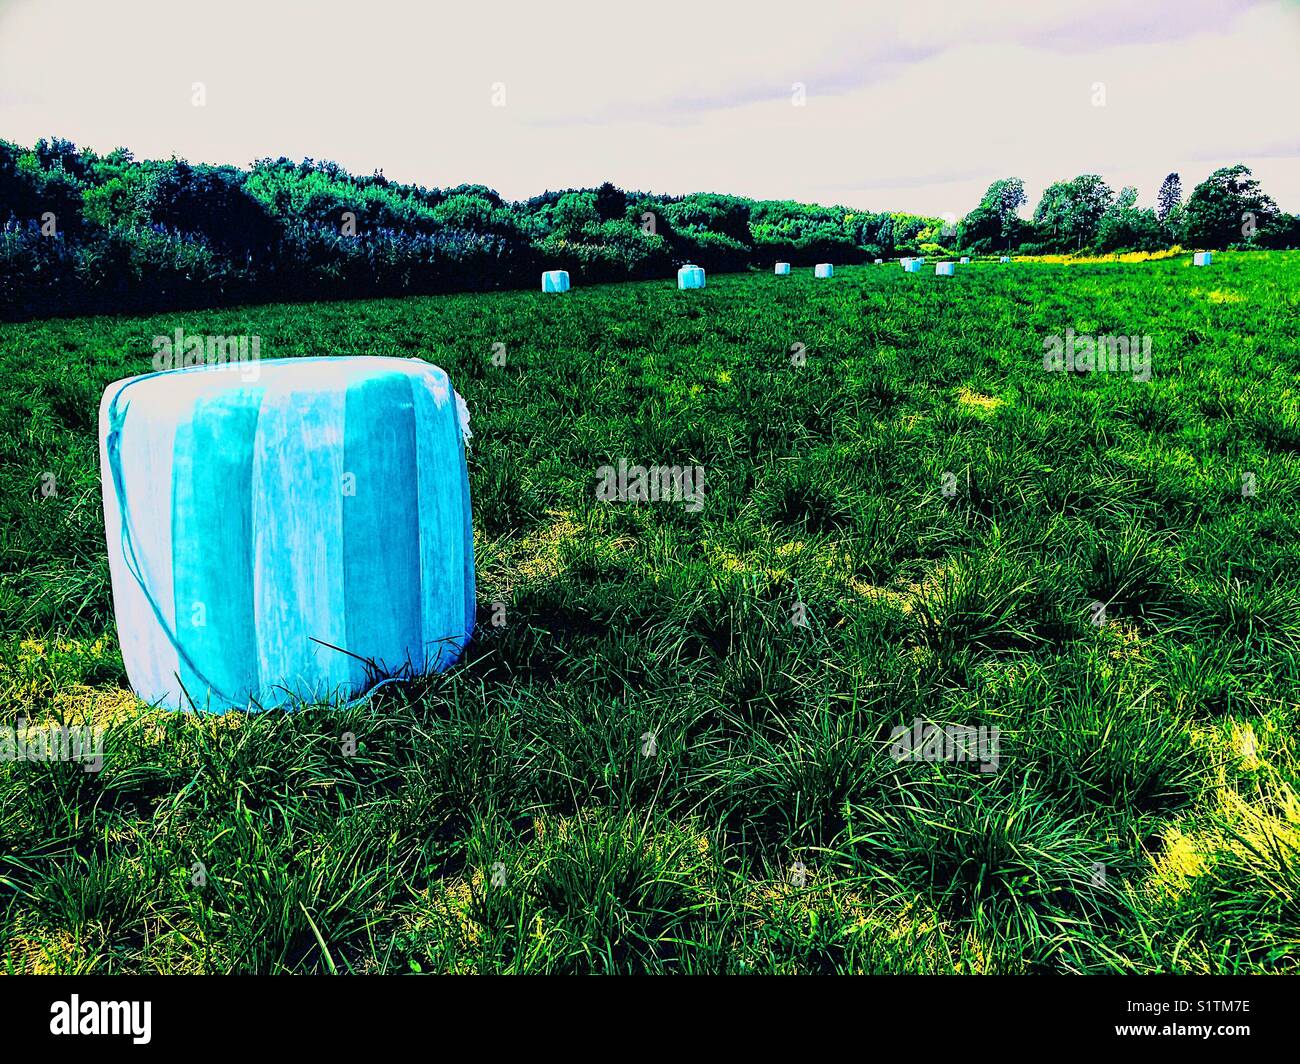 Bales of hay wrapped in blue plastic, Sweden, Scandinavia Stock Photo